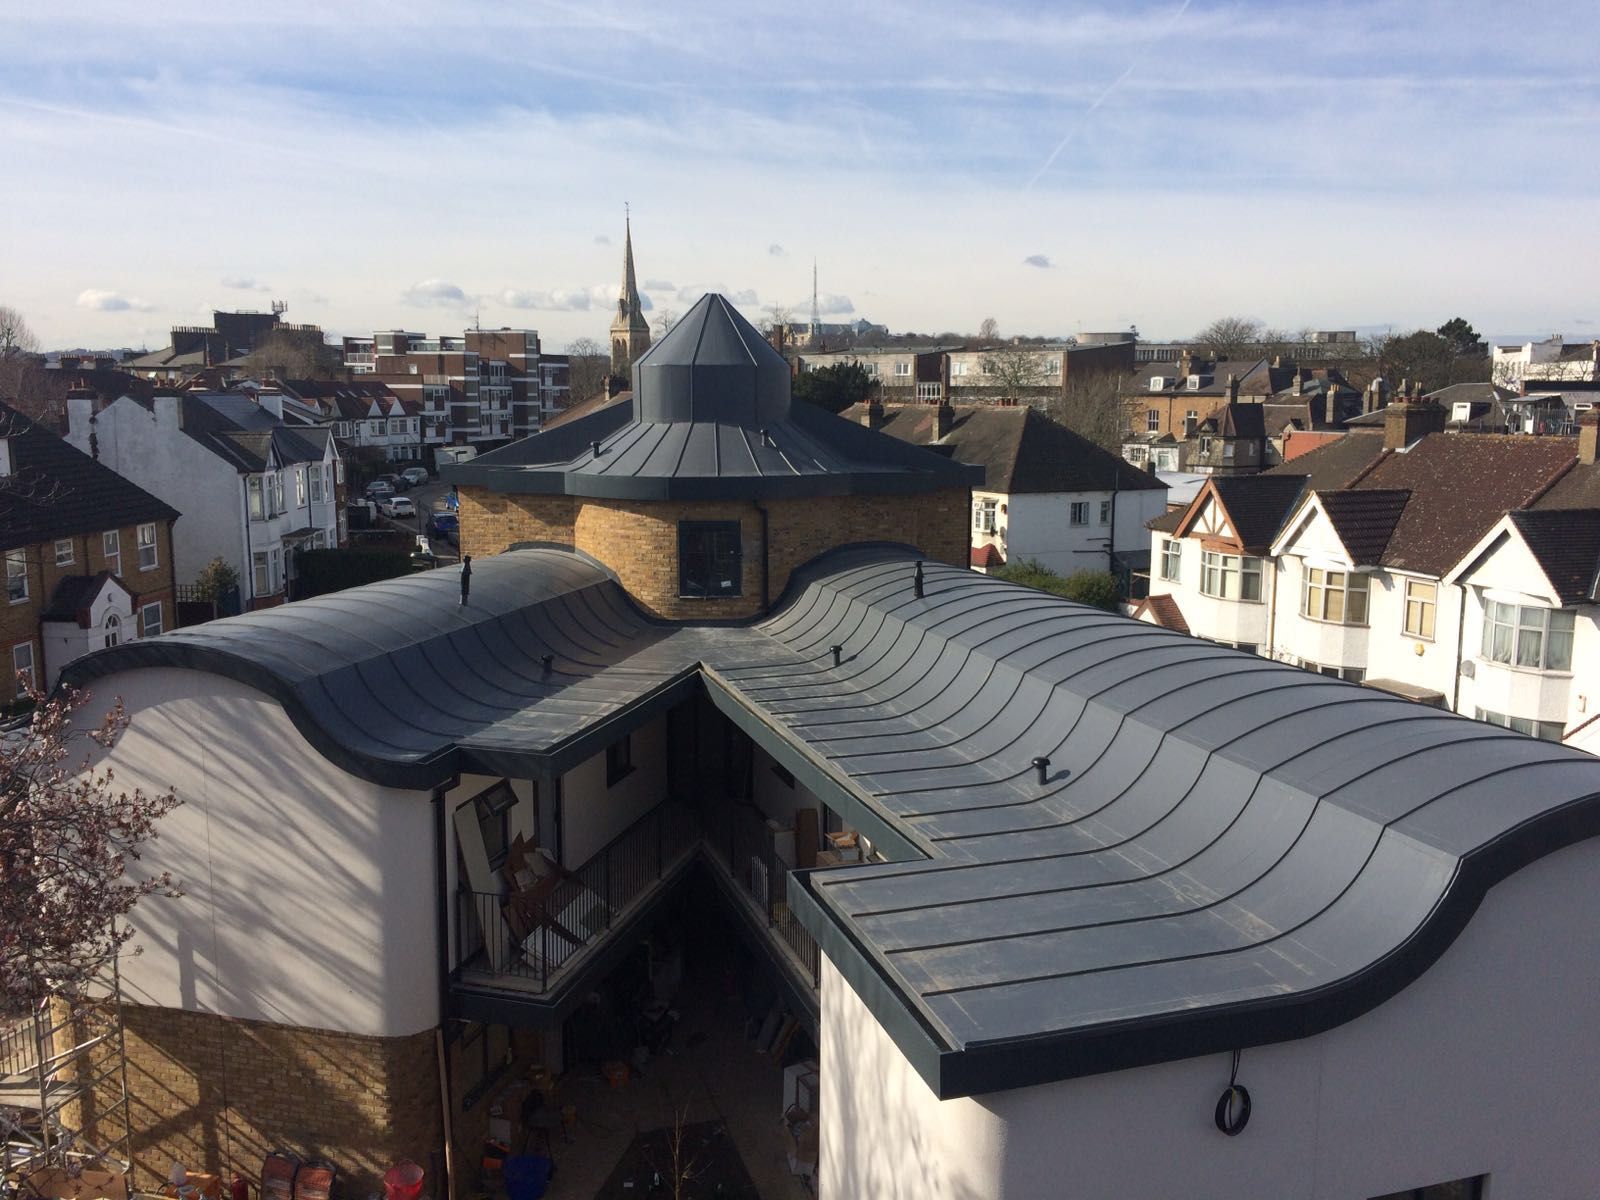 Single Ply Roofing – Sika Sarnafil (with Contour Roofing), Ewart Grove, Wood Green